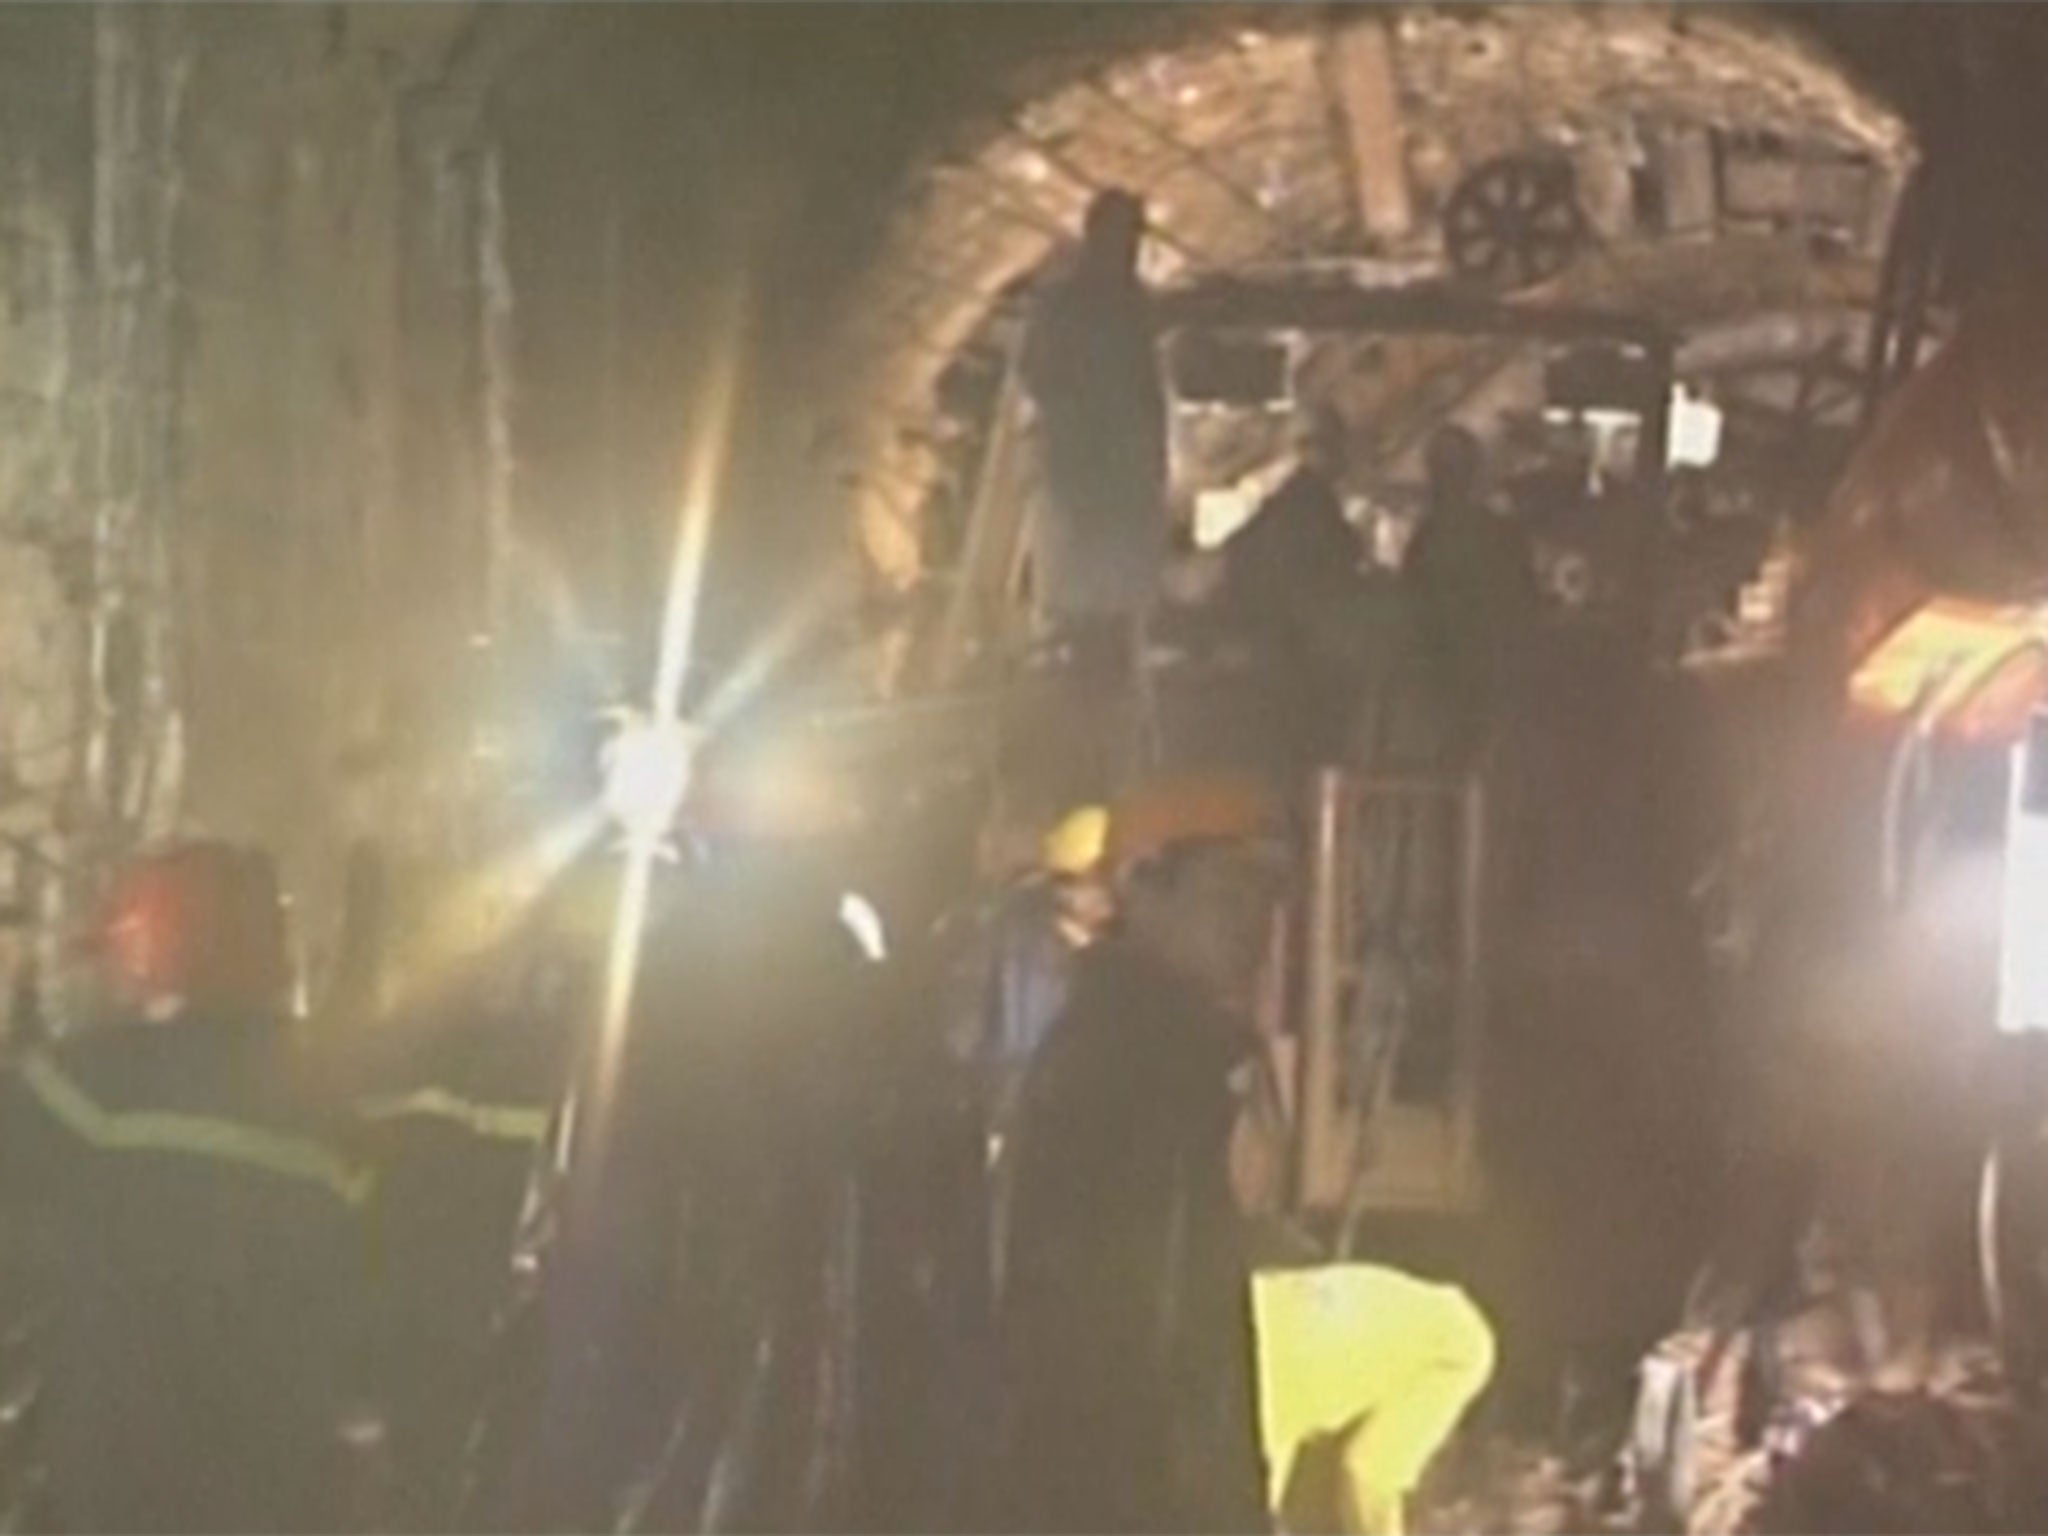 Rescuers in Vietnam have managed to drill a hole through a collapsed tunnel to communicate with 12 trapped workers on Wednesday.